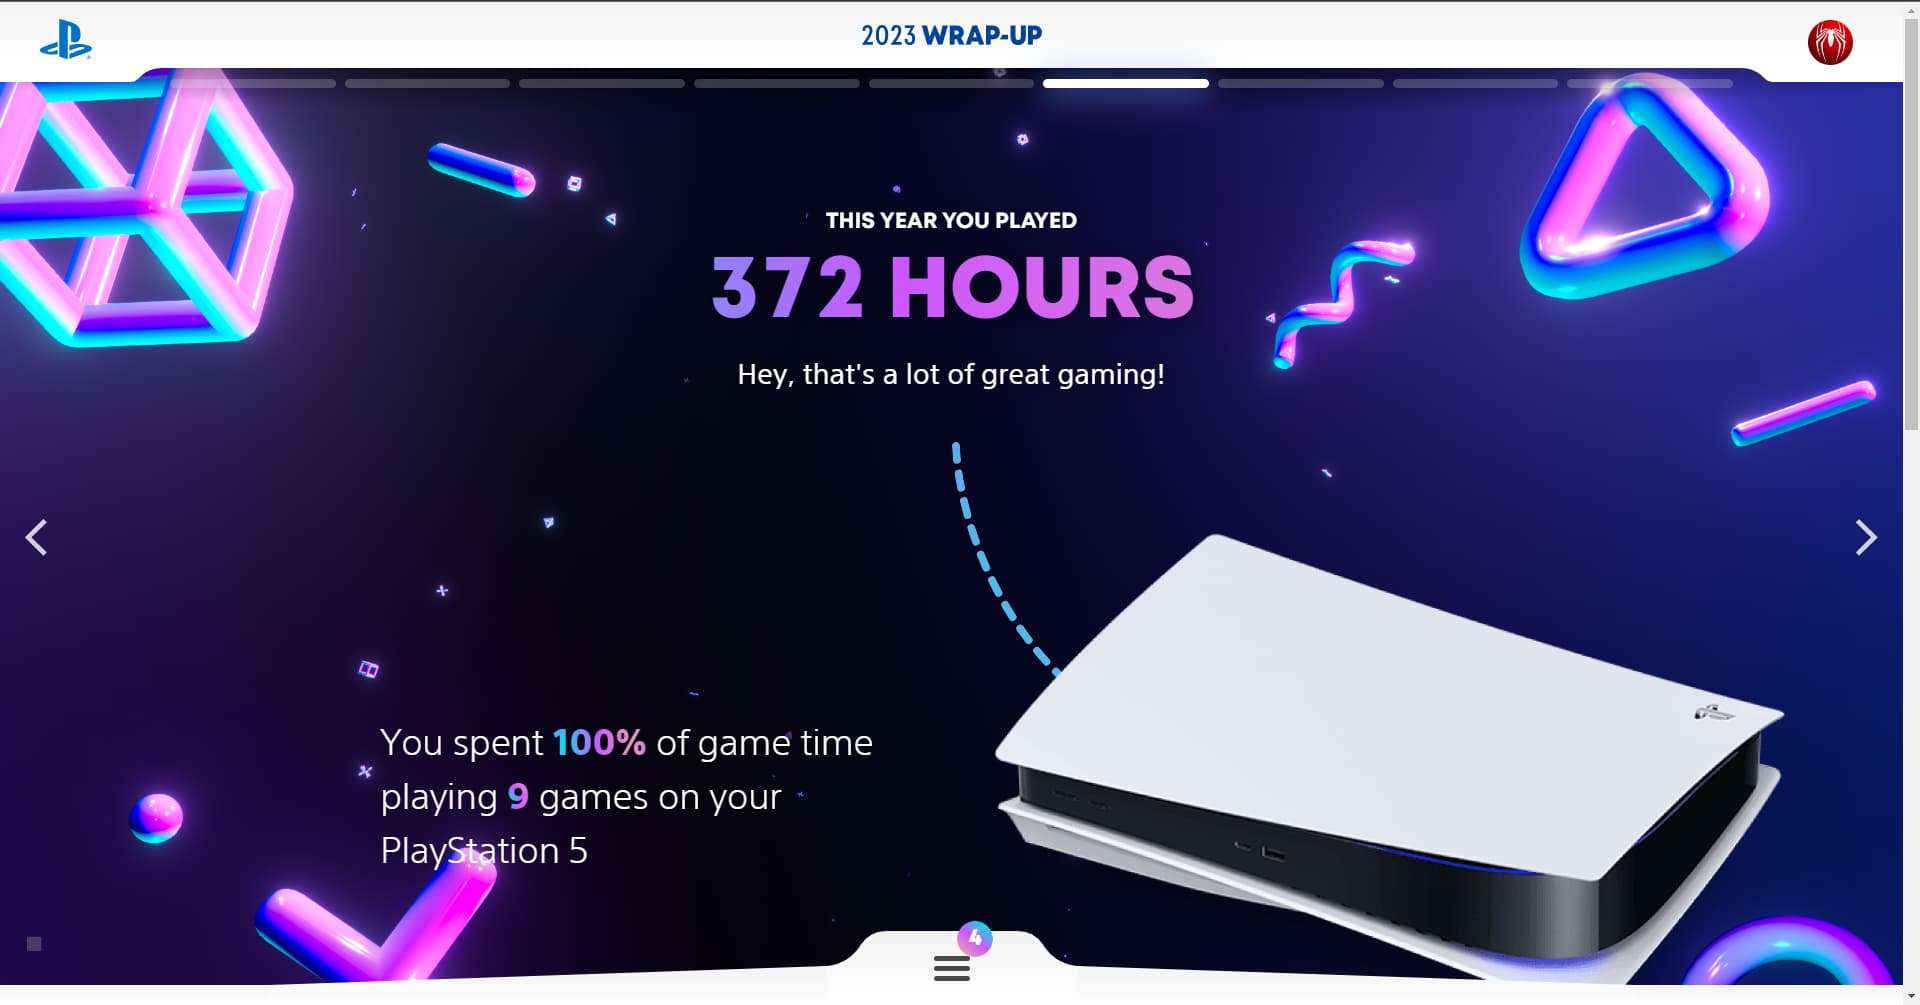 PlayStation wrap up 2020: how to know my hours played in PS4 and PS5? - AS  USA